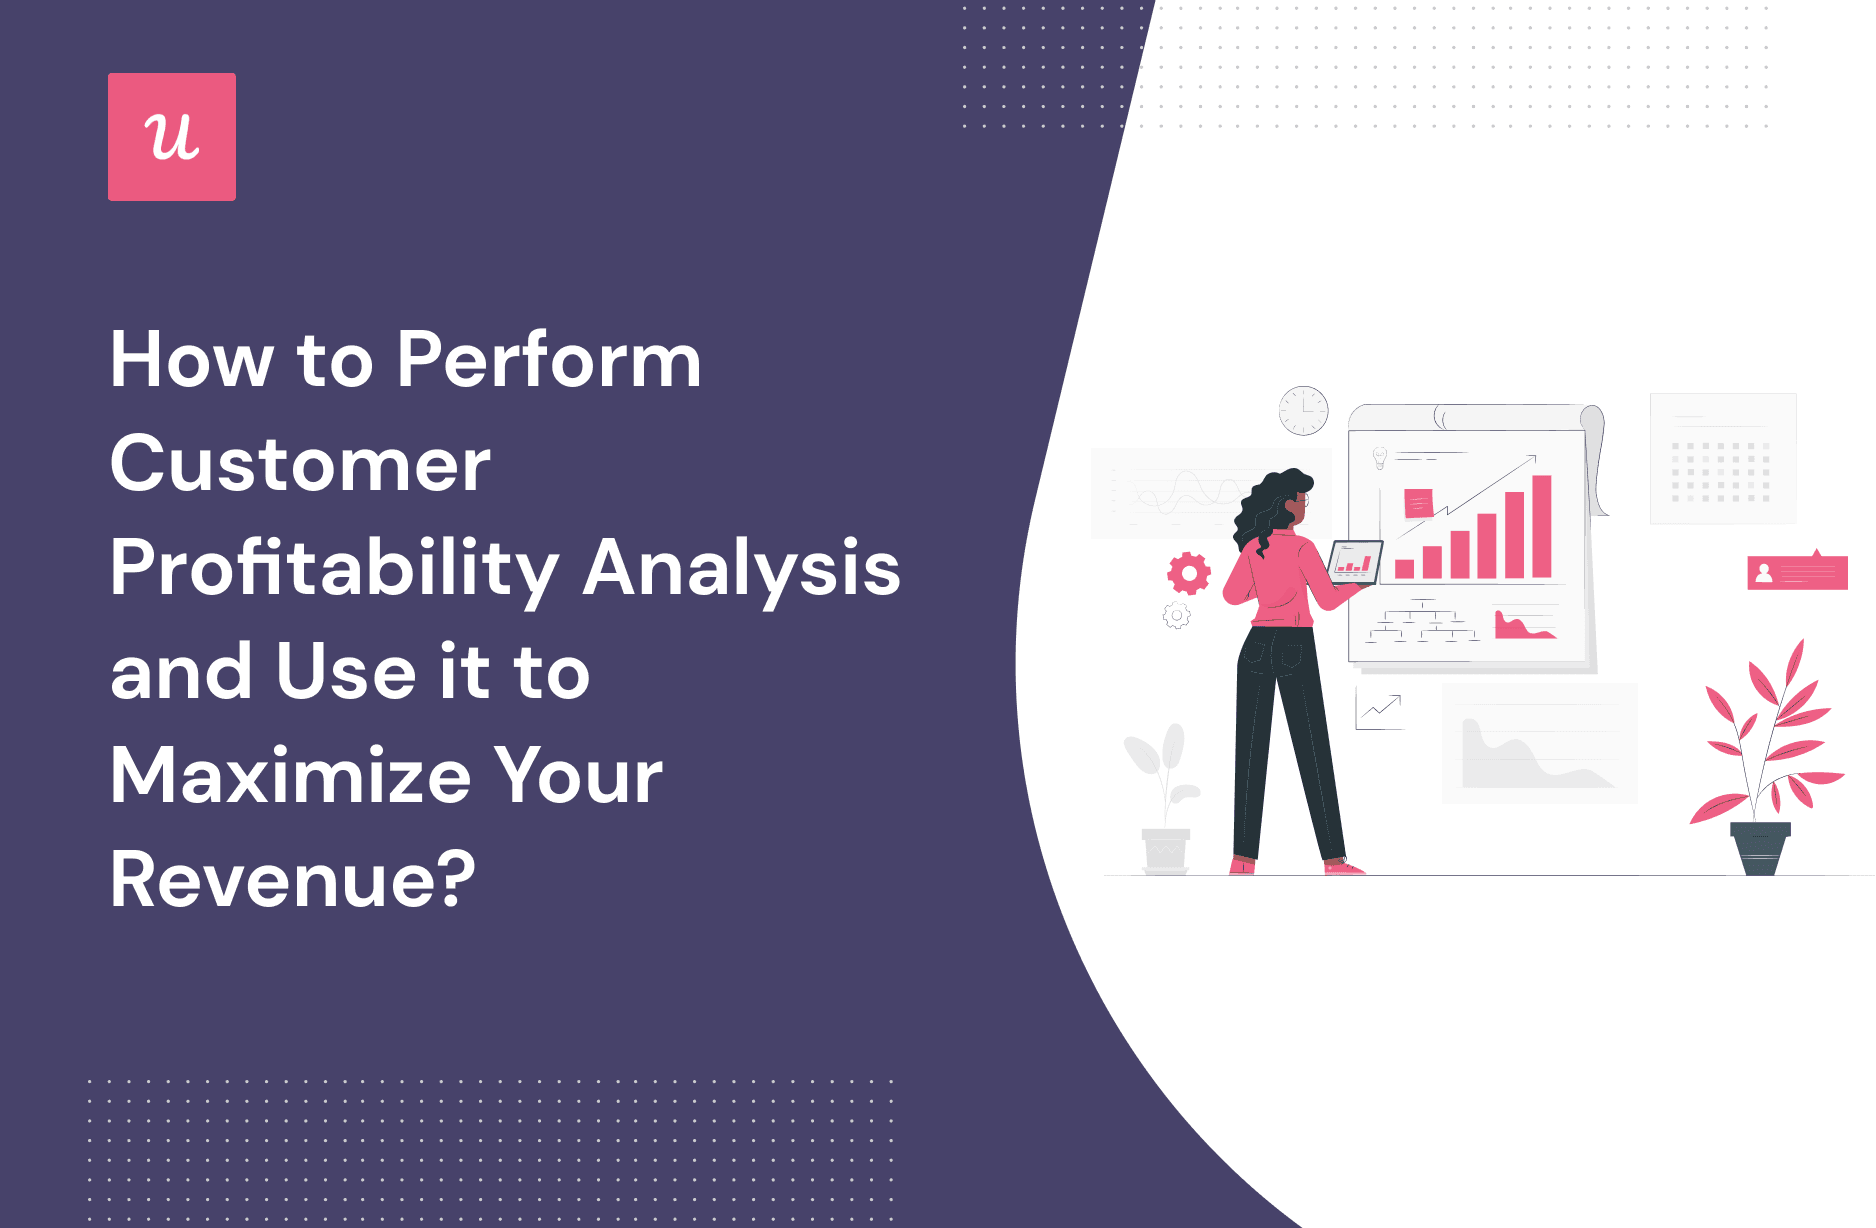 How-To-Perform-Customer-Profitability-Analysis-and-Use-it-To-Maximize-Your-Revenue